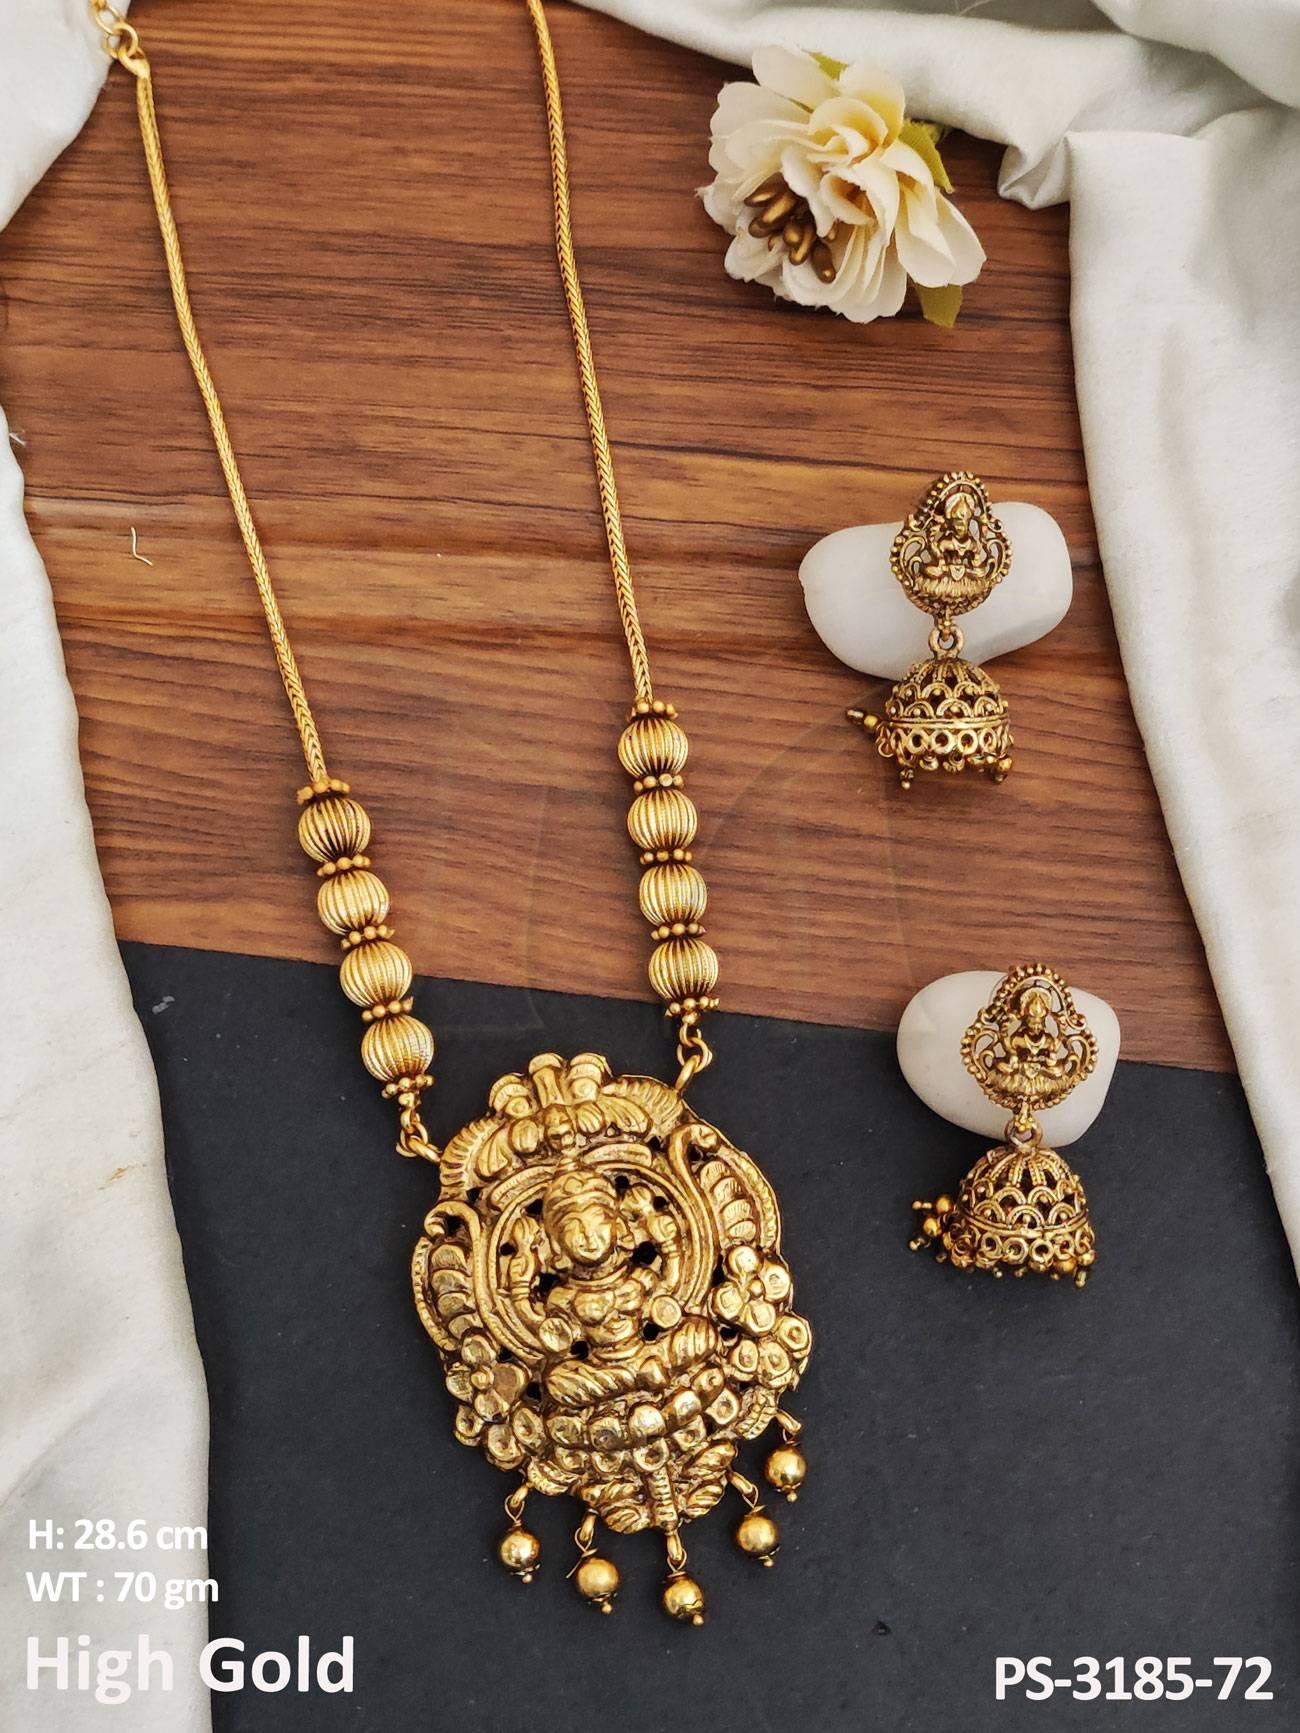 Perfect for special occasions, this long temple jewellery pendant will make a statement.